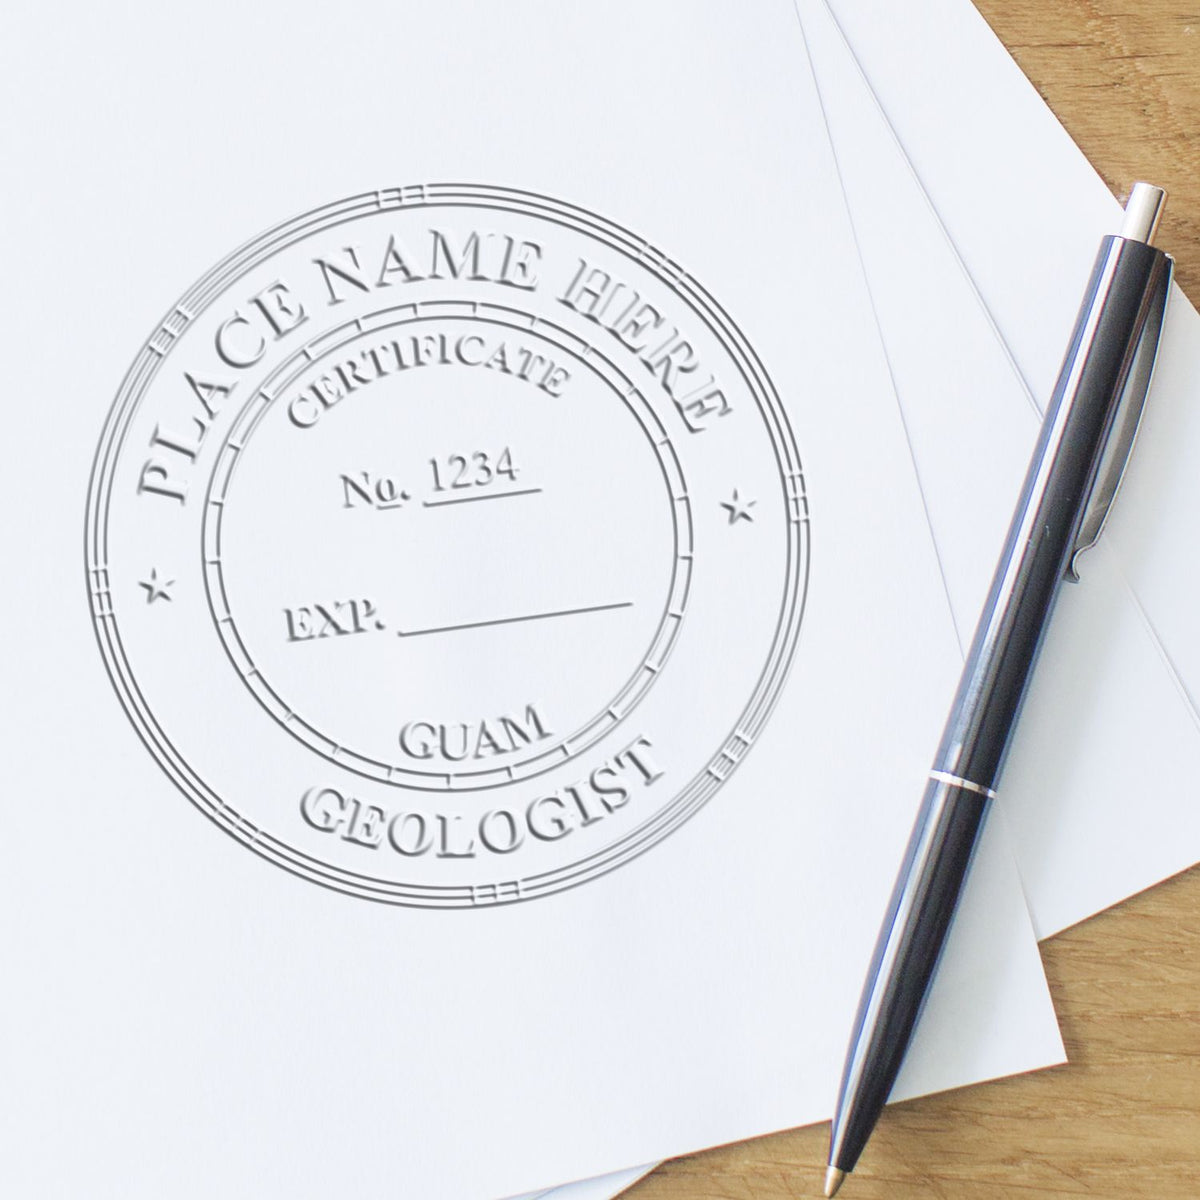 An in use photo of the Hybrid Guam Geologist Seal showing a sample imprint on a cardstock